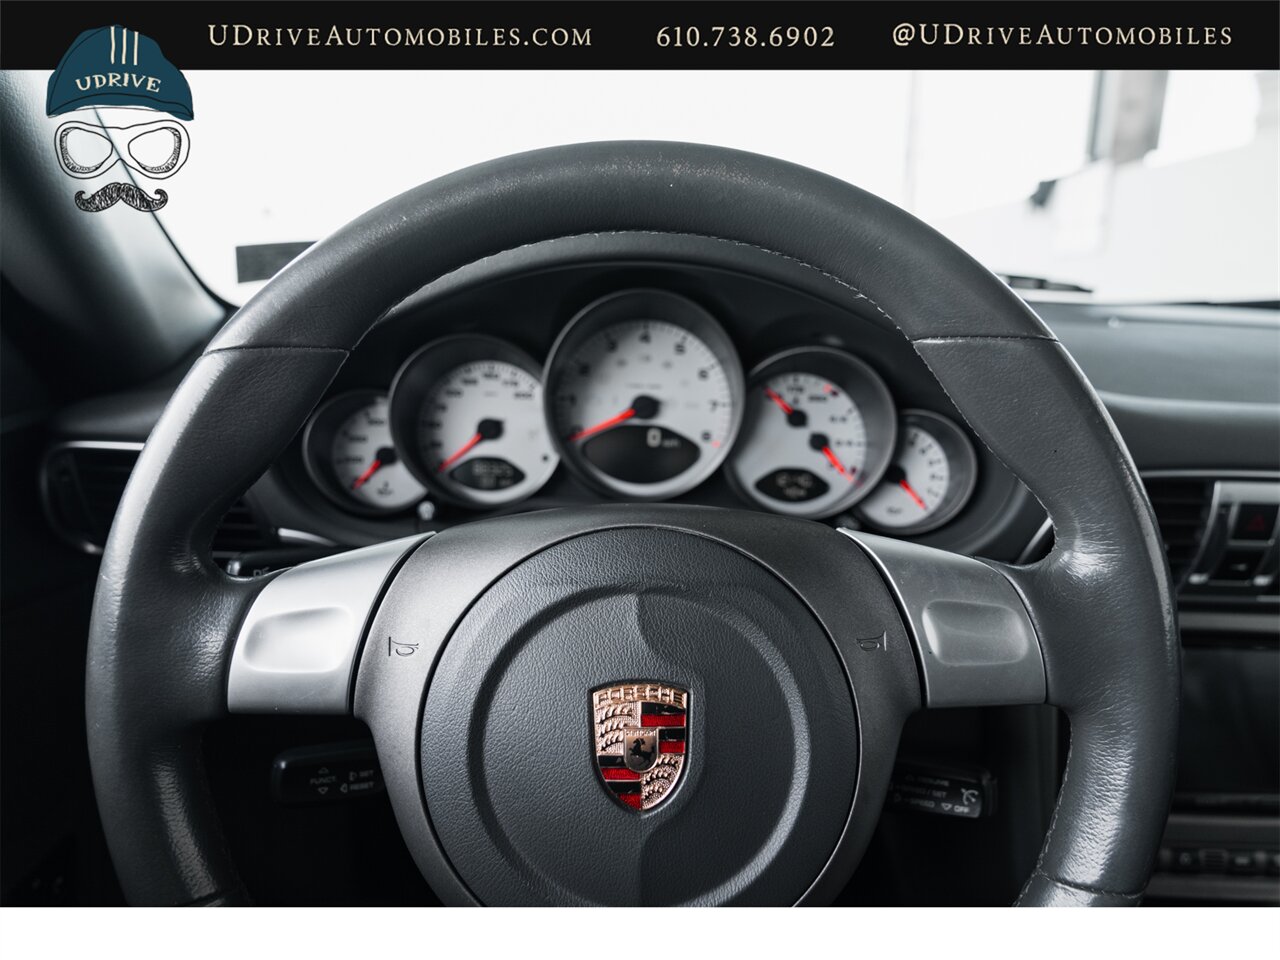 2006 Porsche 911 Carrera 4S  997 C4S 6 Speed Manual Service History - Photo 40 - West Chester, PA 19382